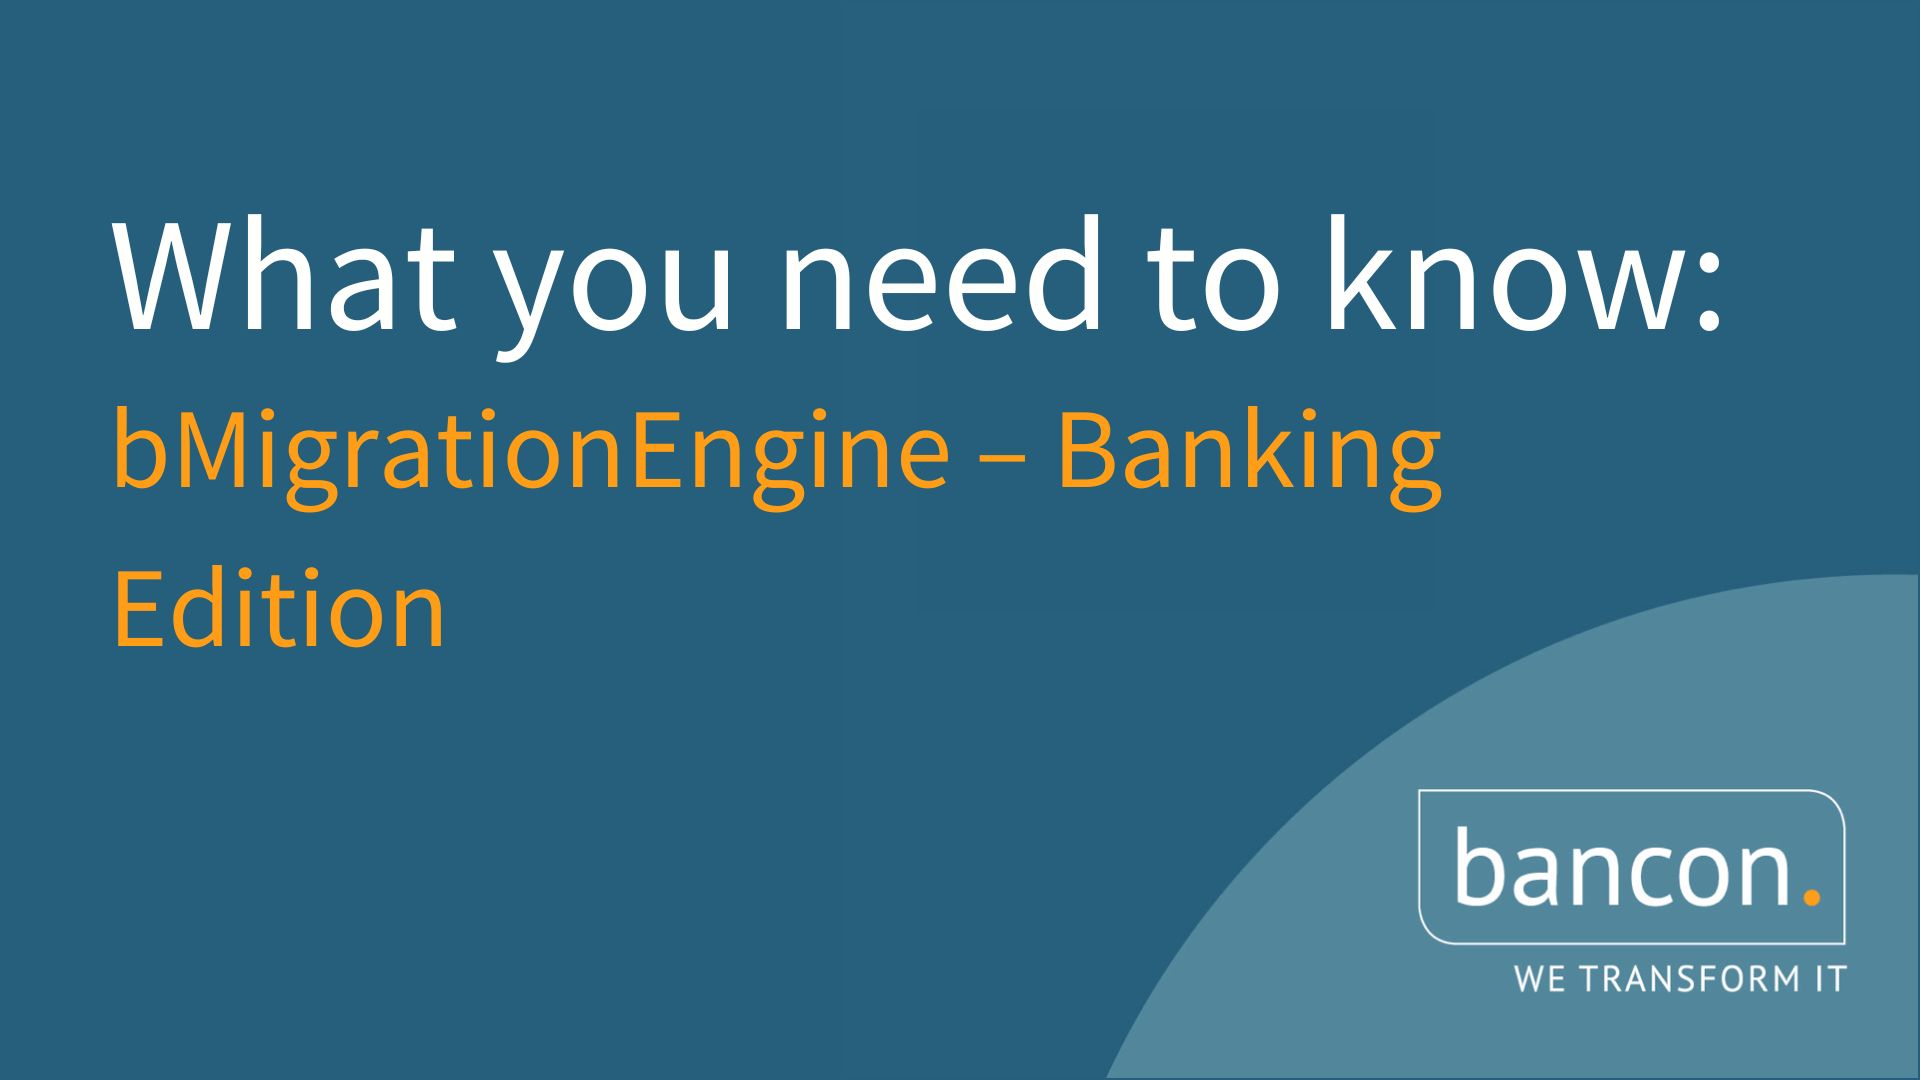 What you need to know about bMigrationEngine Banking Edition